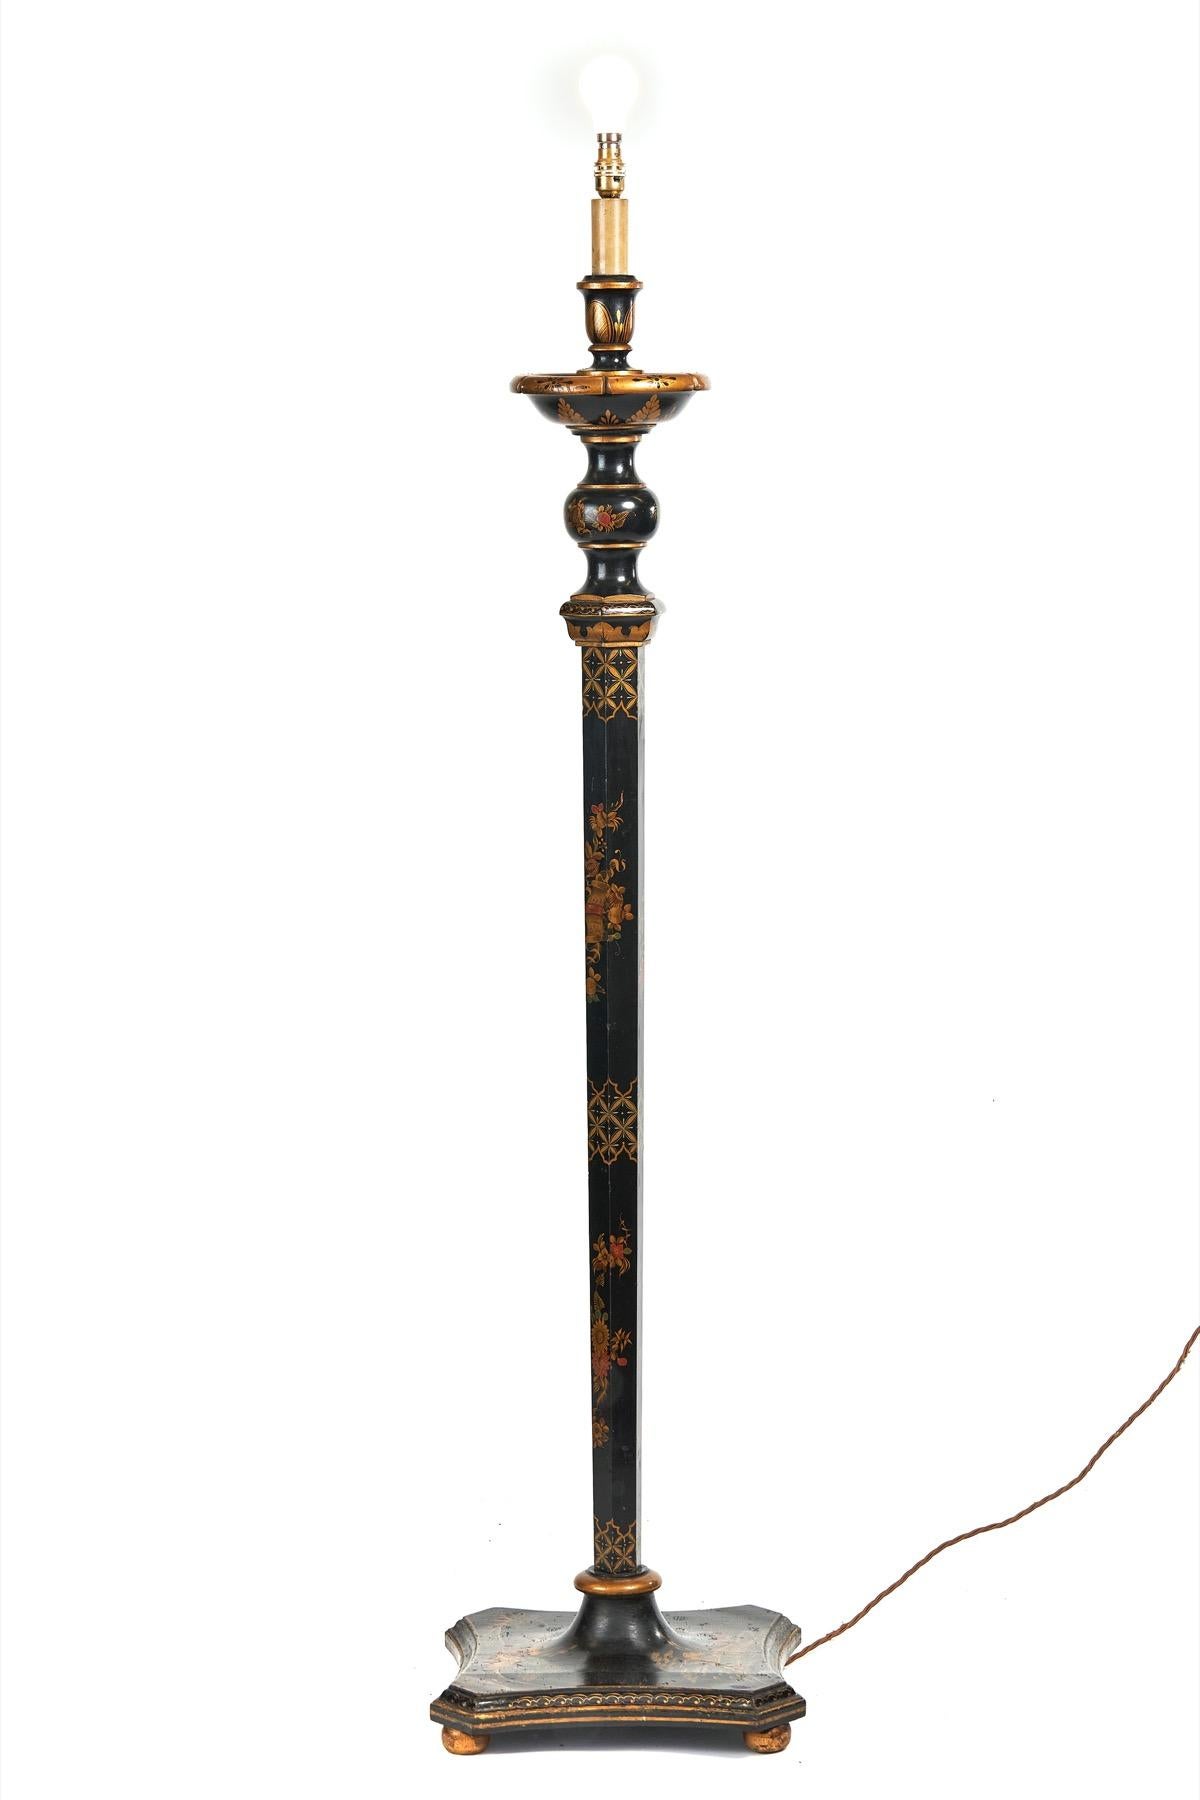 Chinoiserie Decorated Standard Lamp circa 1930s
Black & gold in colour, 
Turned & Tapering Column. Decorated with Gold Lattice Pattern & Floral & leaf detail
Square Shaped Base Decorated with Birds , Trees & flowers & Foliage
Sitting on 4 gold